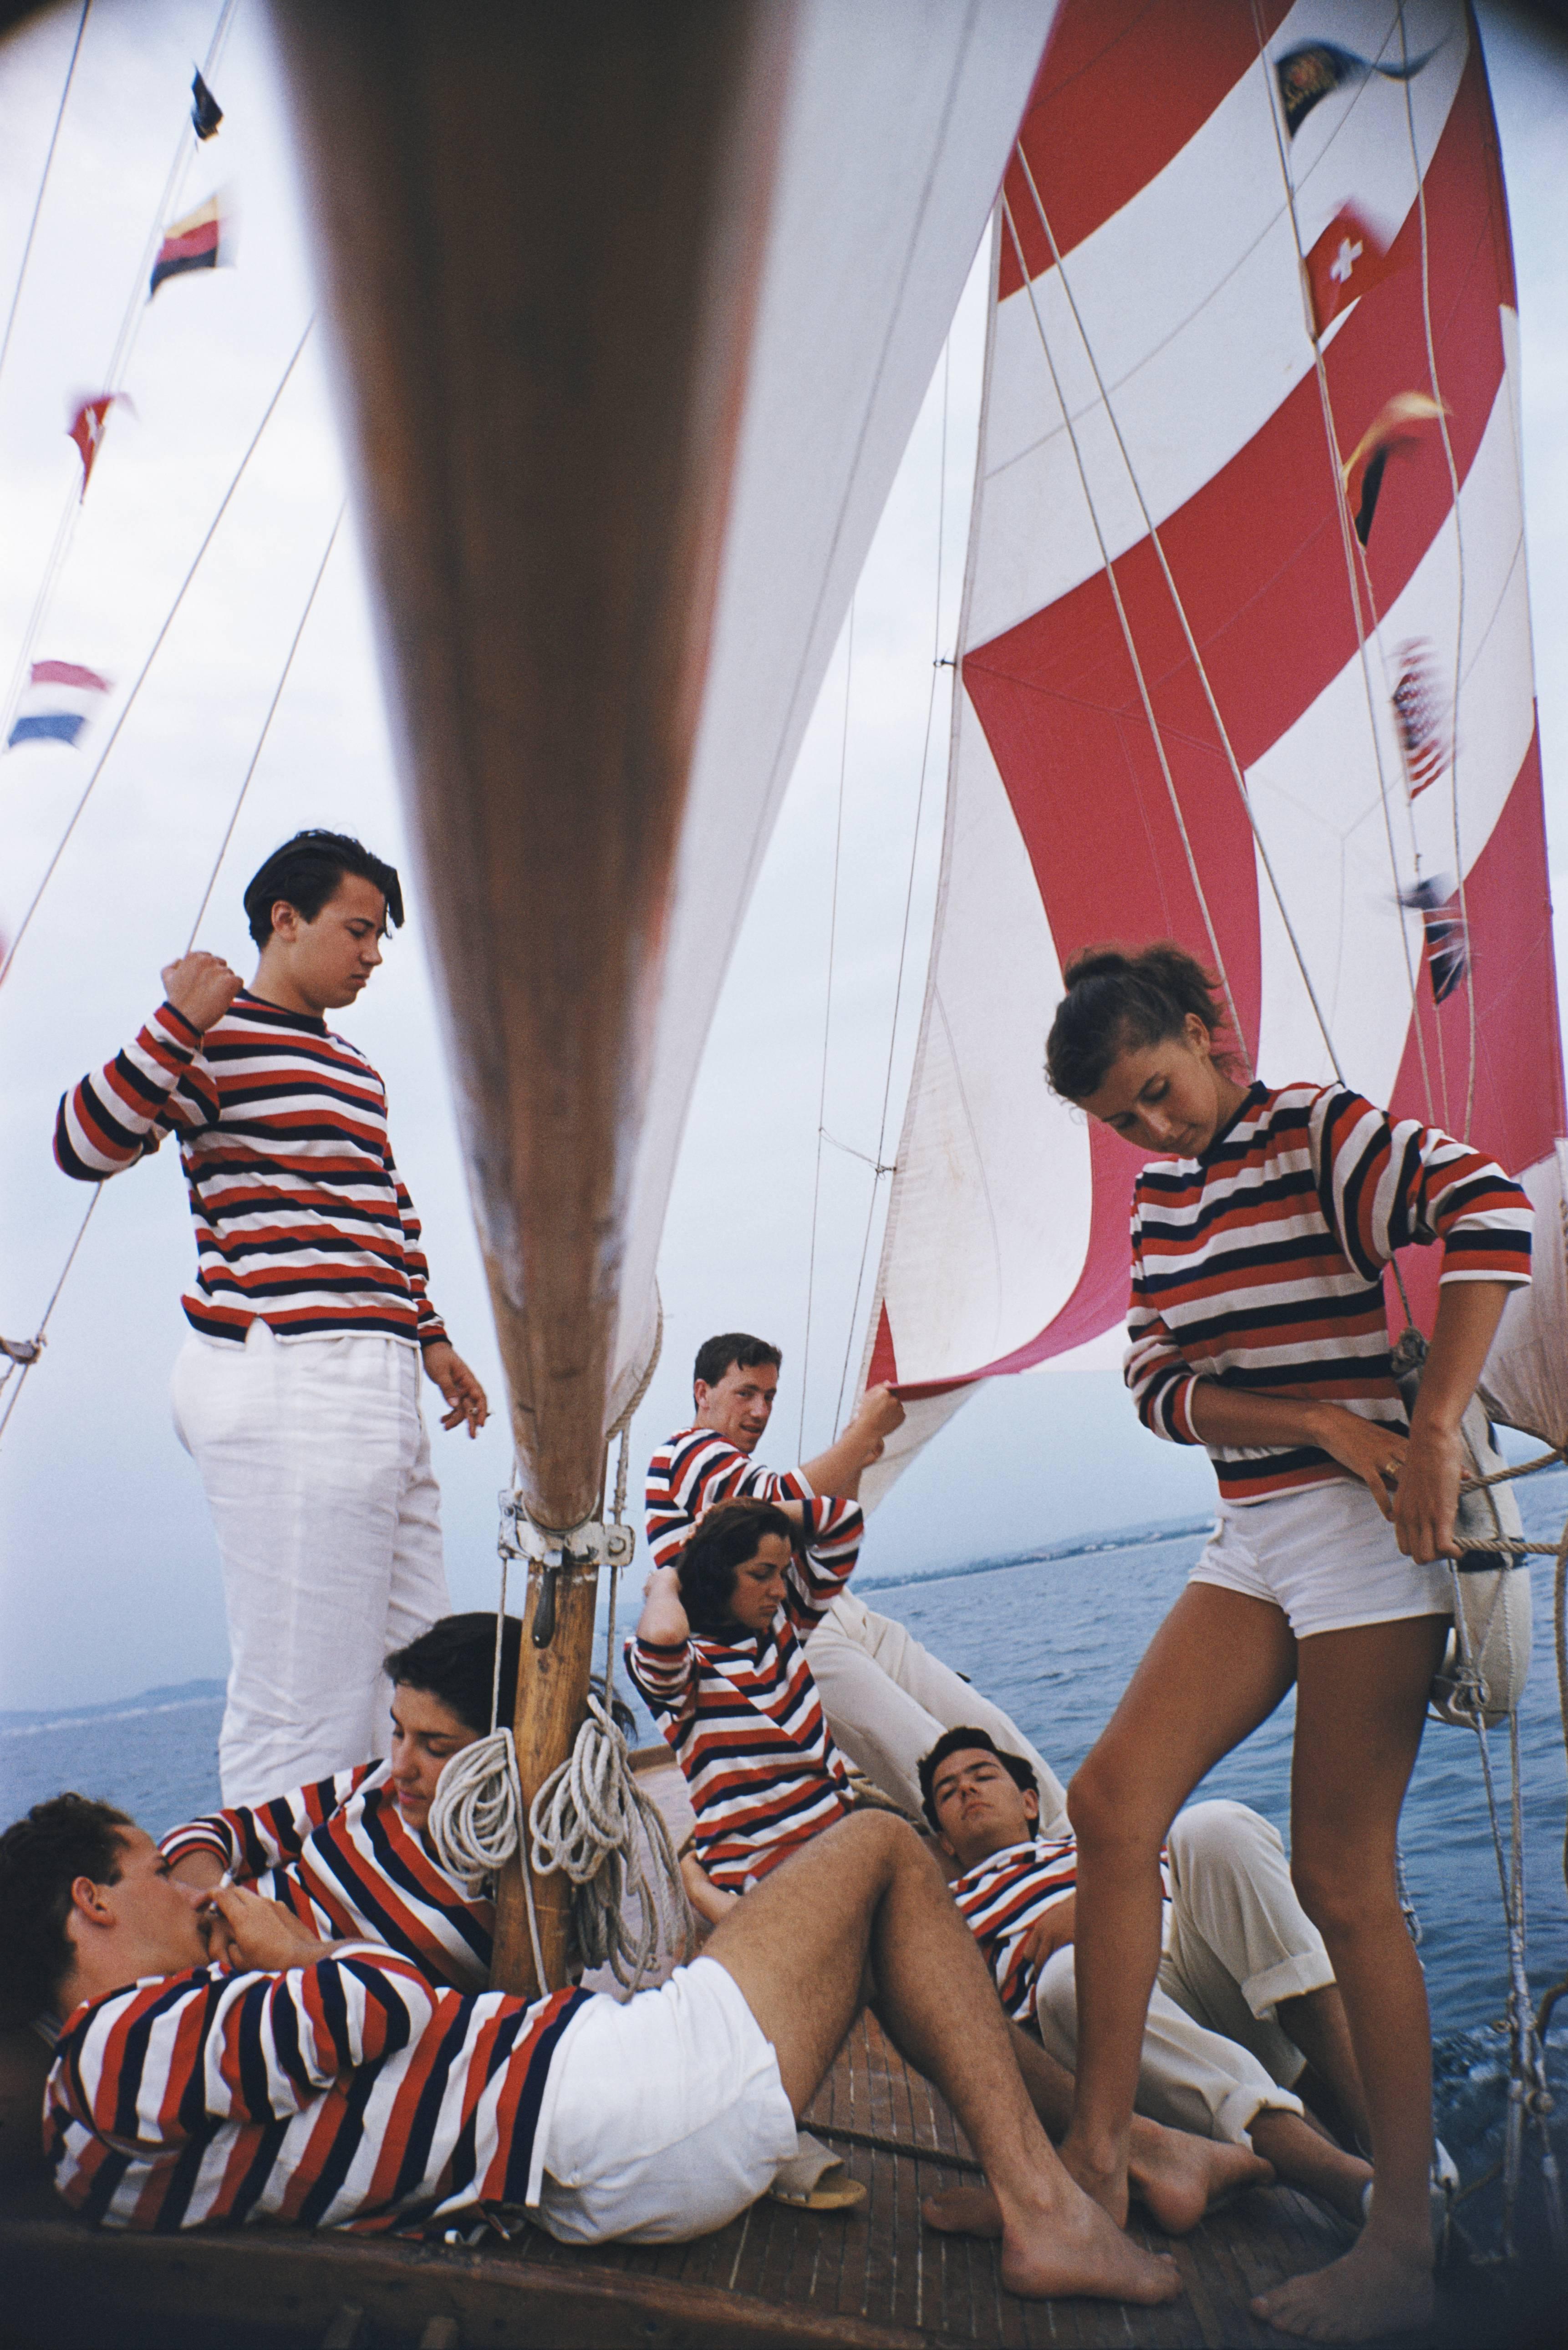  Young holidaymakers from Milan enjoy a sail on the Adriatic, 1956. (Photo by Slim Aarons/Hulton Archive/Getty Images) Estate Stamped Limited Edition of 150

C-type print from the original transparency held at the Getty Images Archive, London.